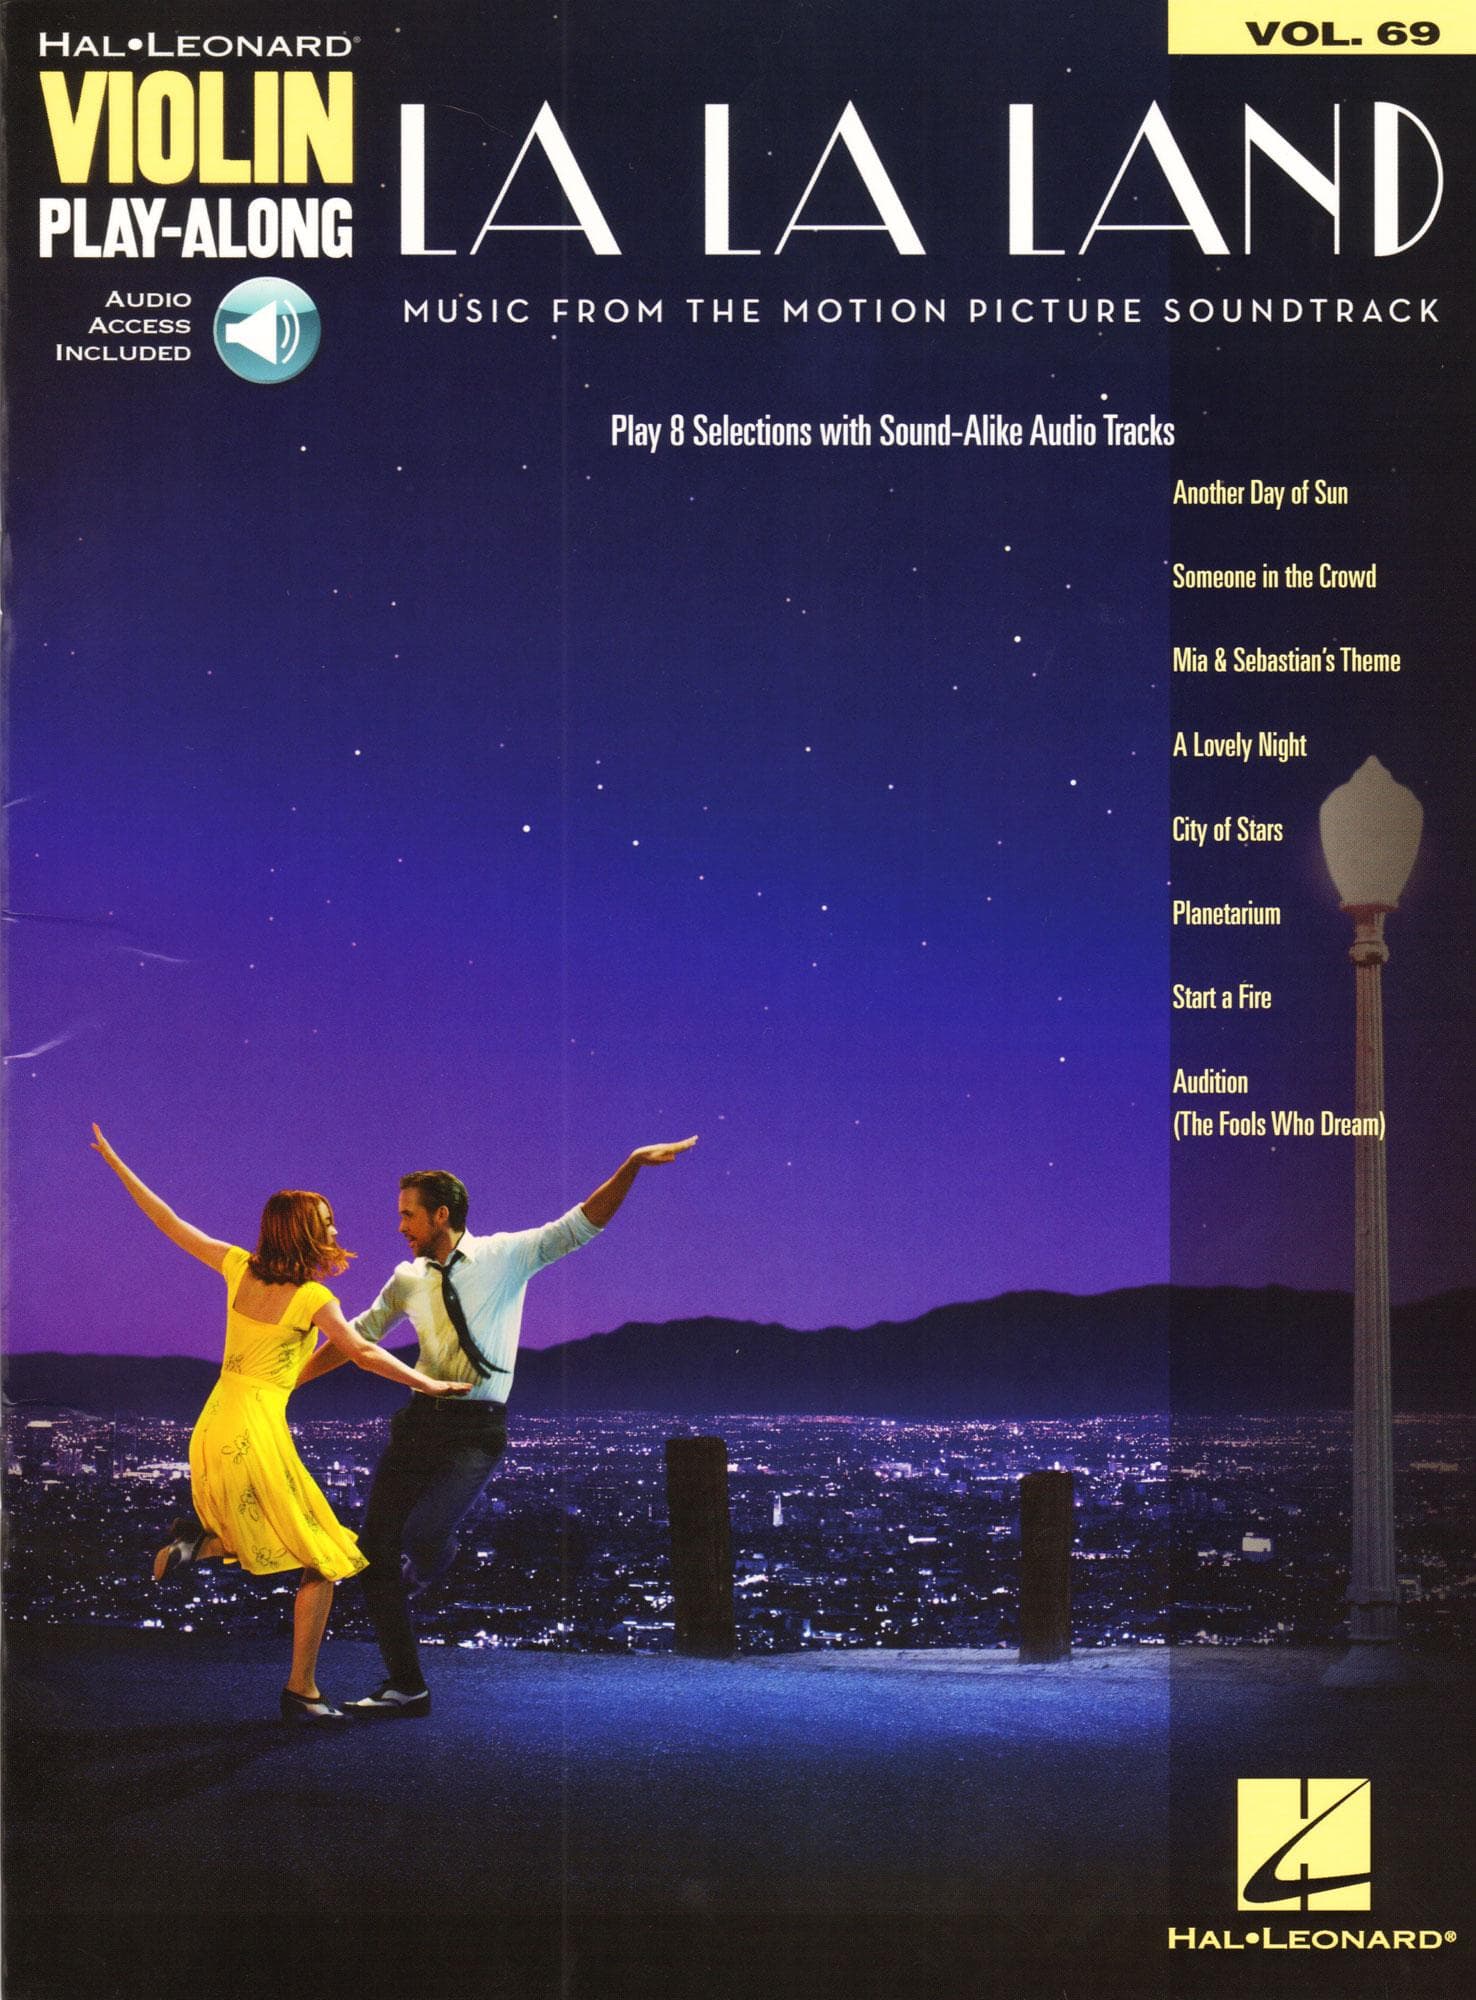 La La Land - 8 Songs from the Motion Picture Soundtrack - Play-Along Vol. 69 - for Violin with Online Audio - Hal Leonard